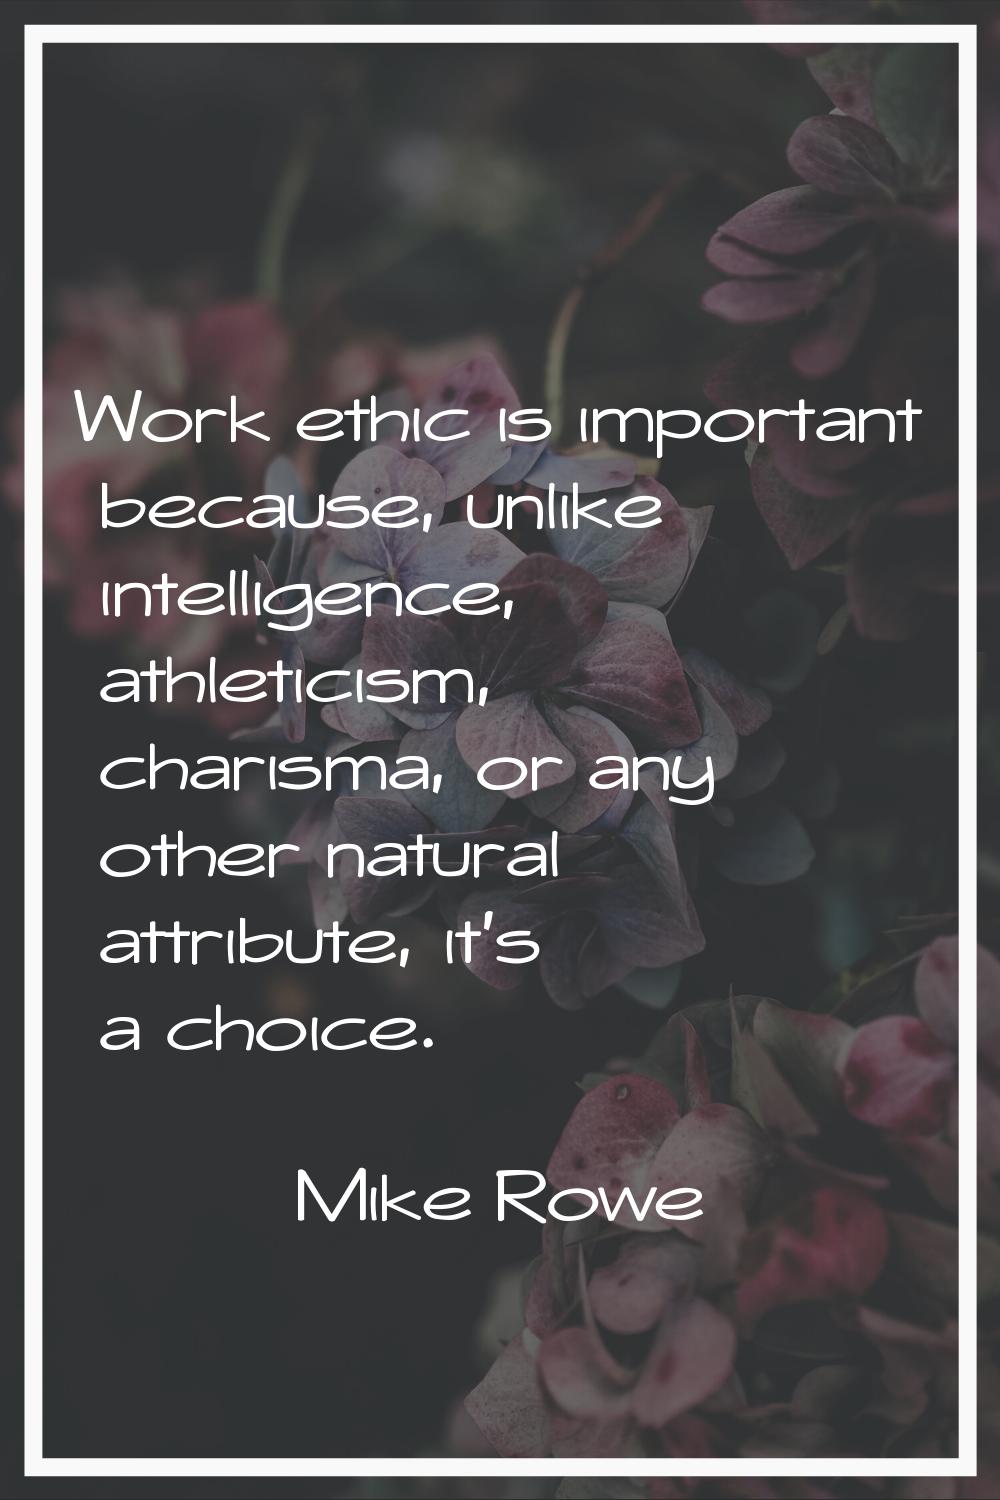 Work ethic is important because, unlike intelligence, athleticism, charisma, or any other natural a